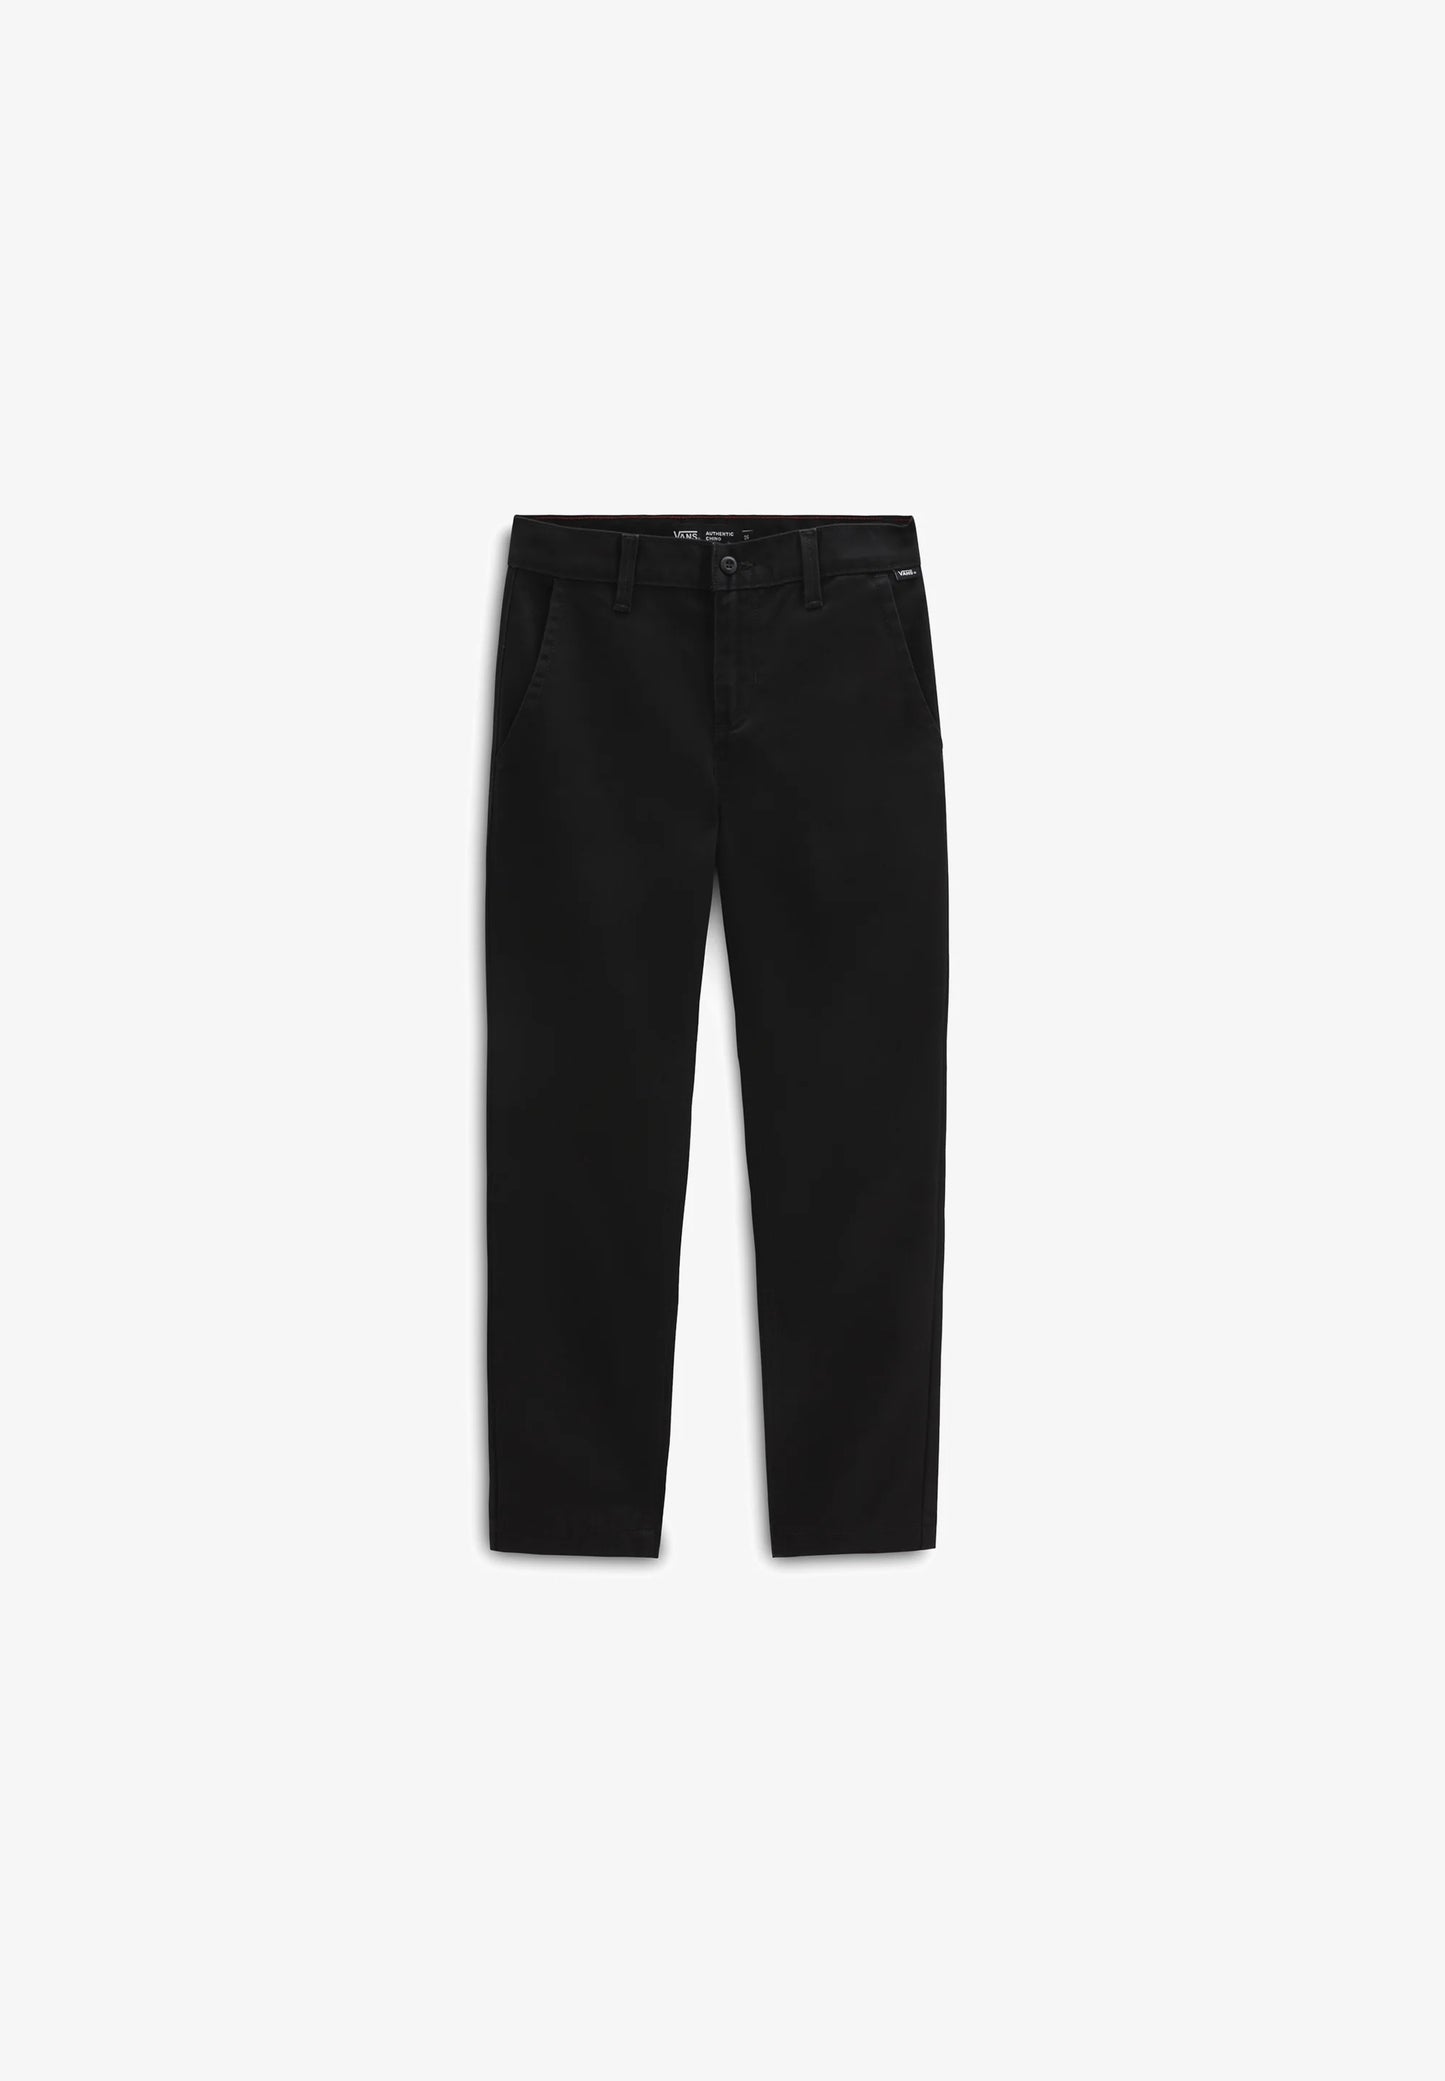 VANS - BY AUTHENTIC CHINO PANTS - BLACK